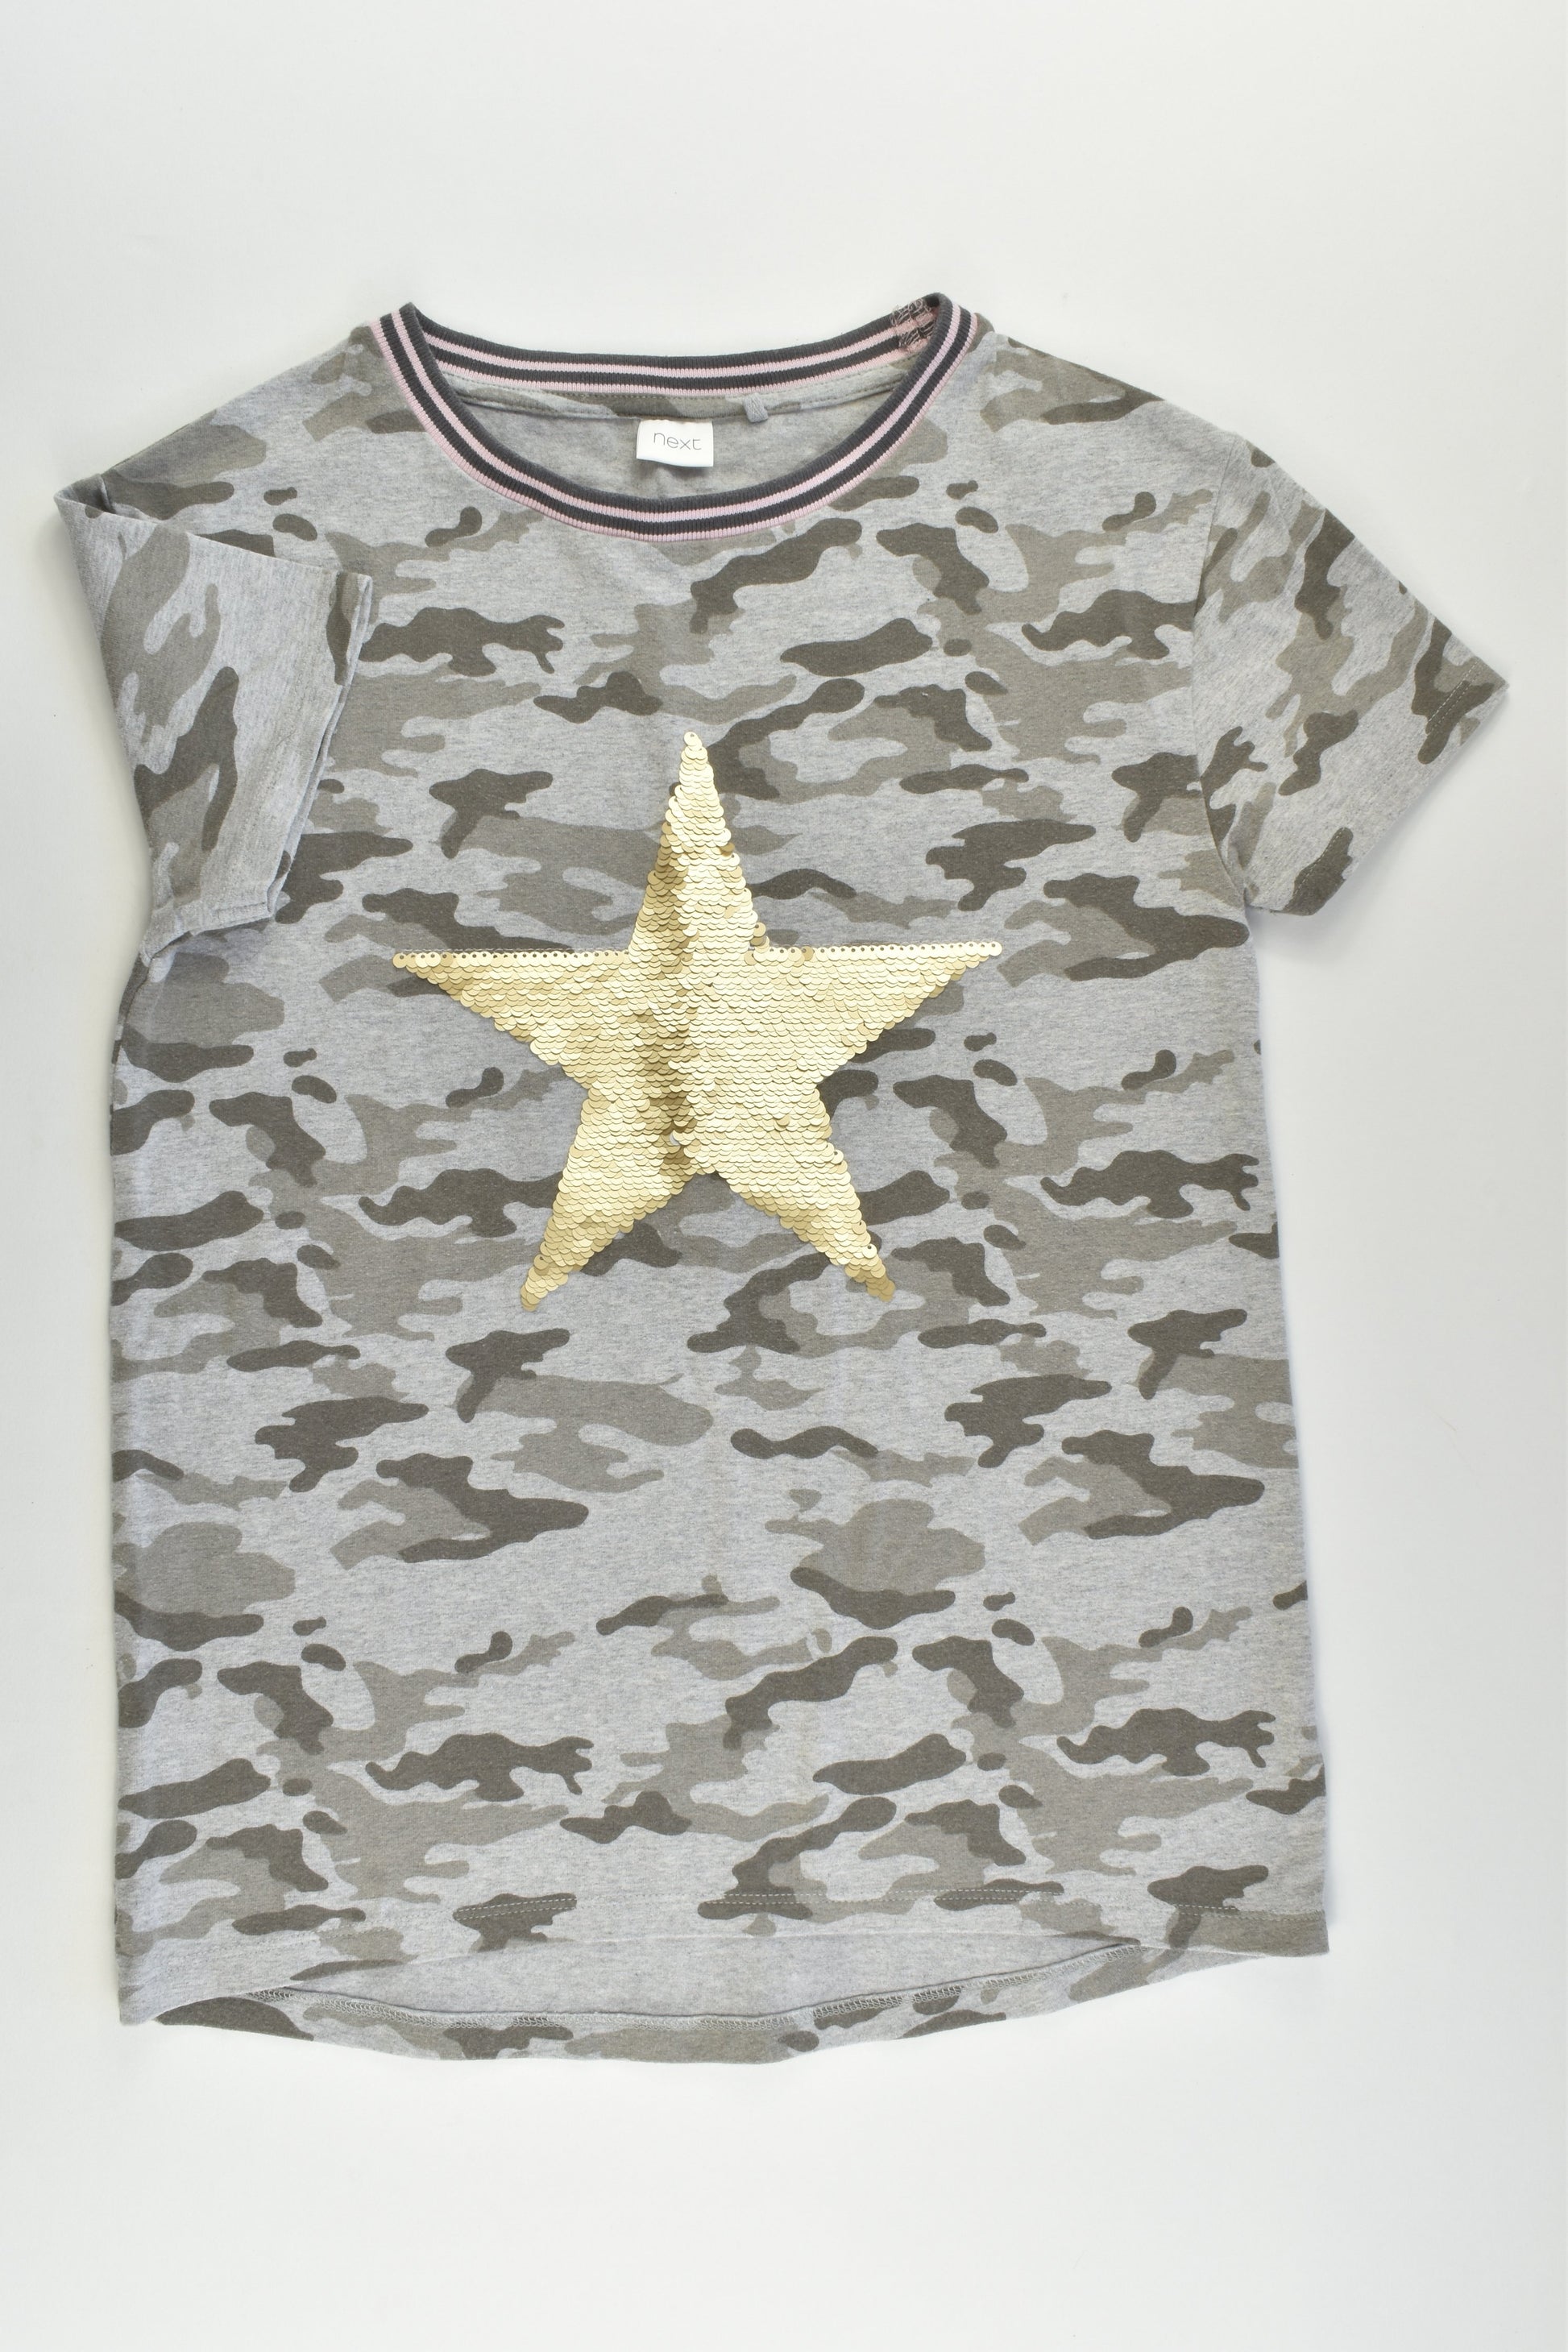 Next Size 10 Camouflage Reversible Sequins Star T-shirt